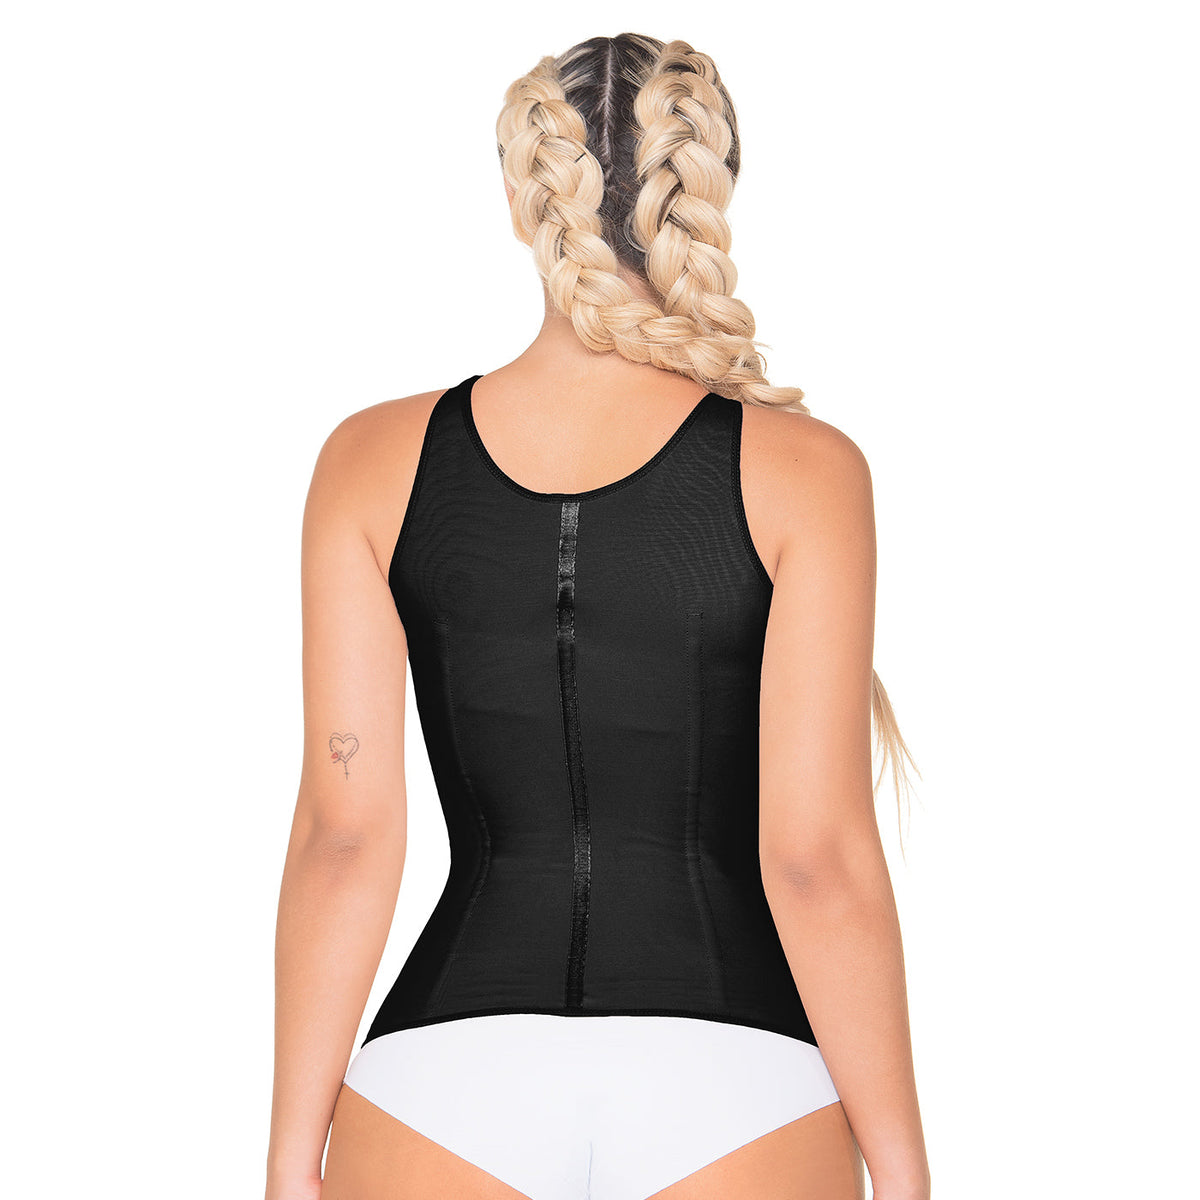 Fajas MariaE FU124 | Women Tummy Control Shapewear Vest for Women | Post Surgery and Daily Use